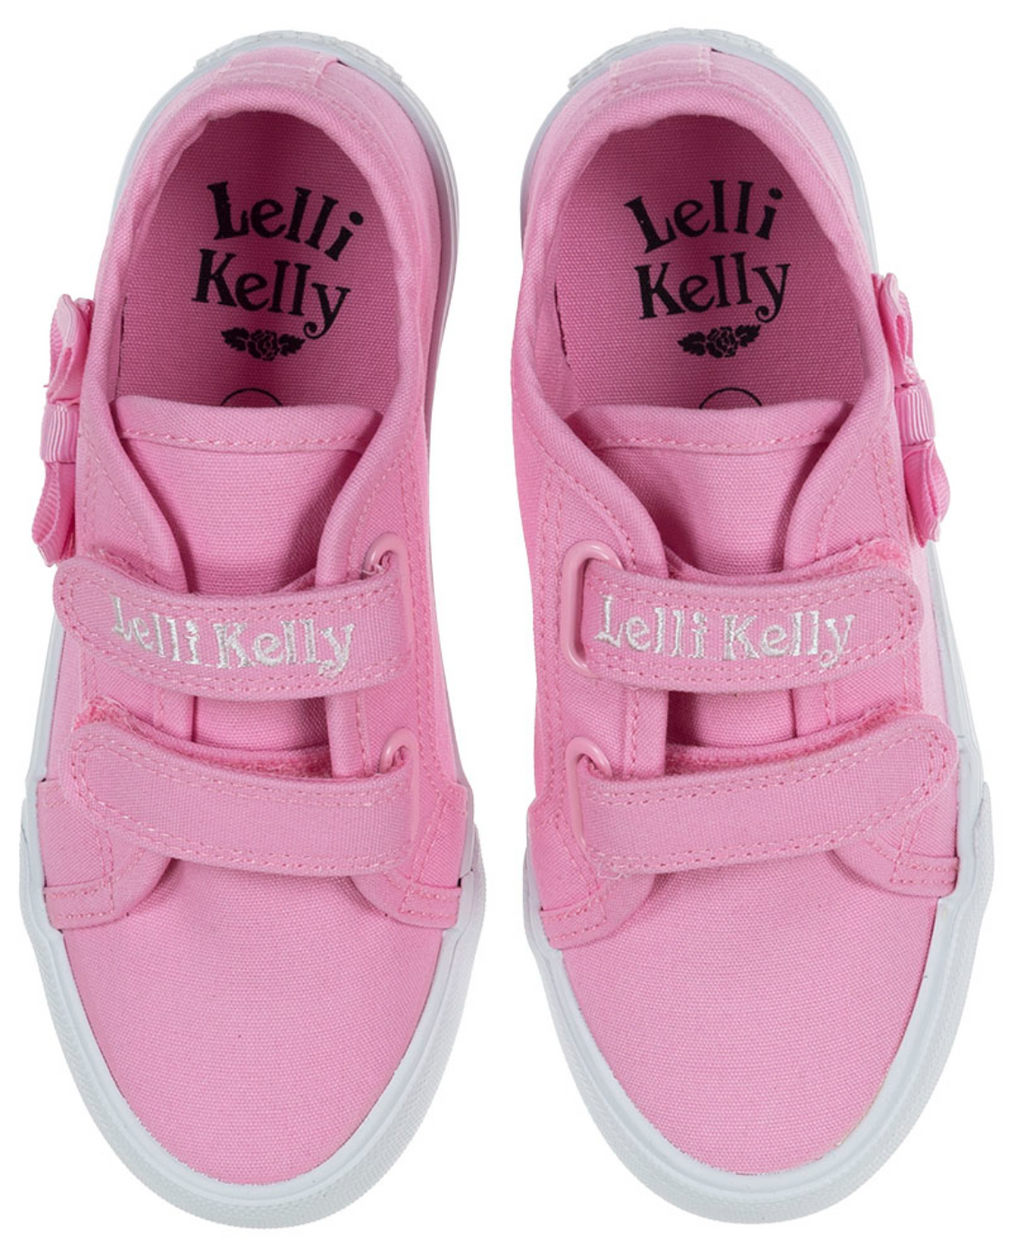 SS23 Lelli Kelly LILY Pink Bow Canvas Shoes